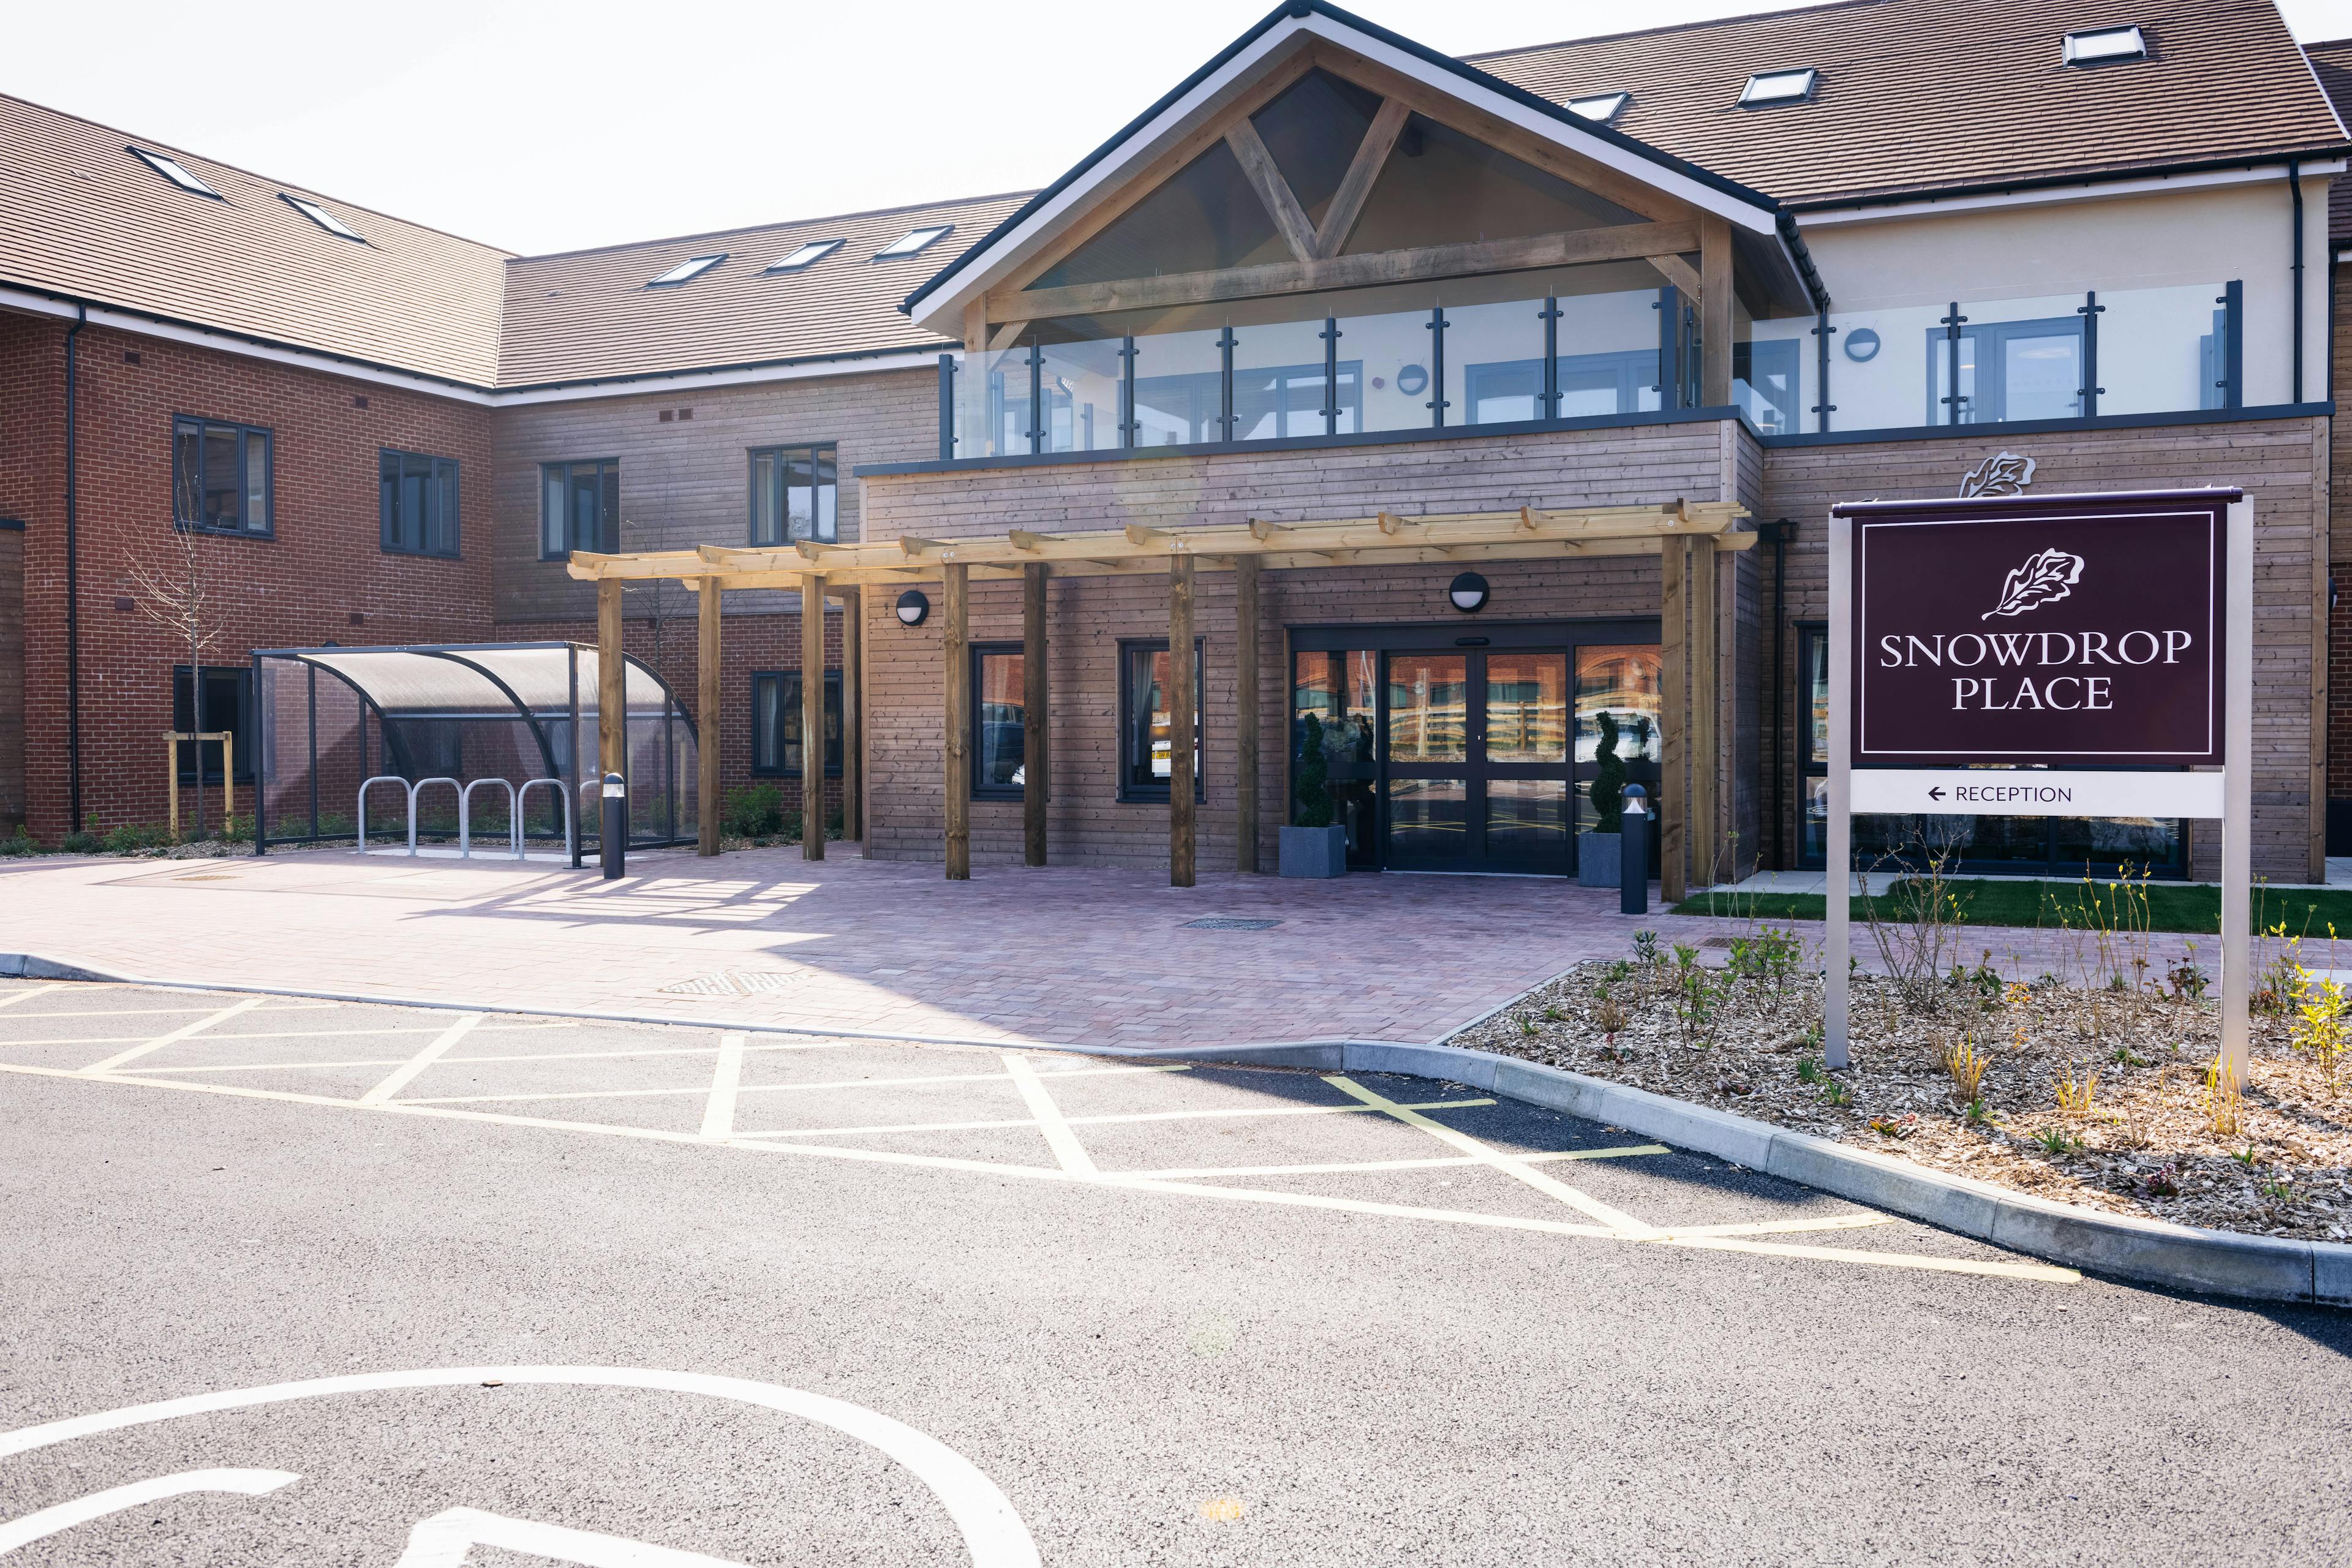 Exterior of Snowdrop Place Care Home in Southampton, Hampshire